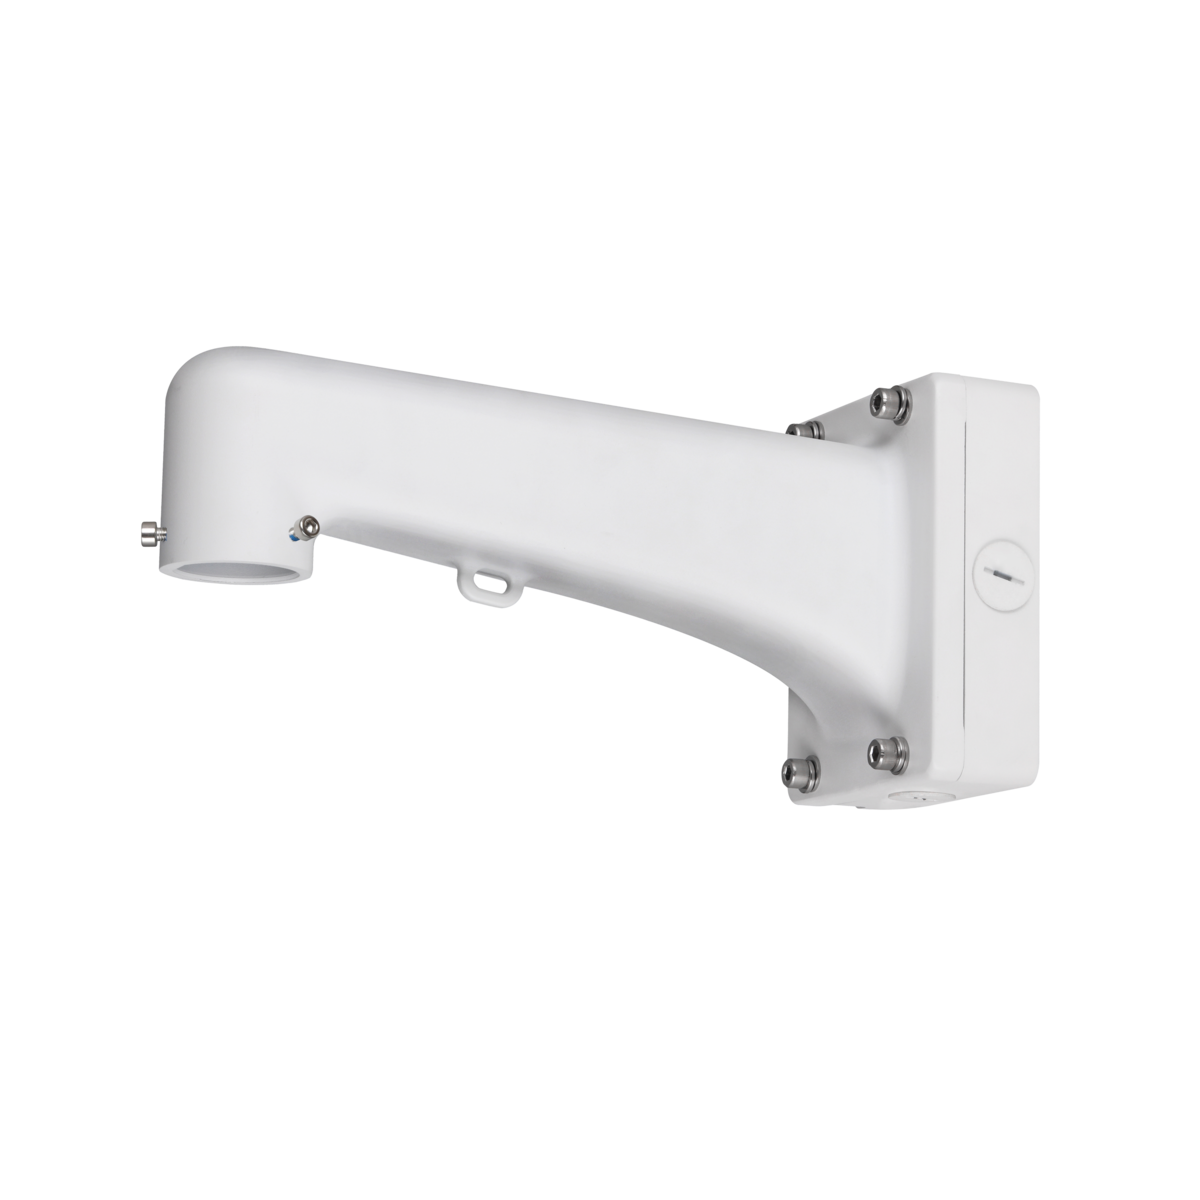 DAHUA WALL MOUNT BRACKET WITH JUNCTION BOX SUITS SPEED DOME PTZ/ DOME/ FISHEYE WHITE ALUMINIUM 8 KG MAX LOAD 2 KG WITH SAFETY ROPE HOOK